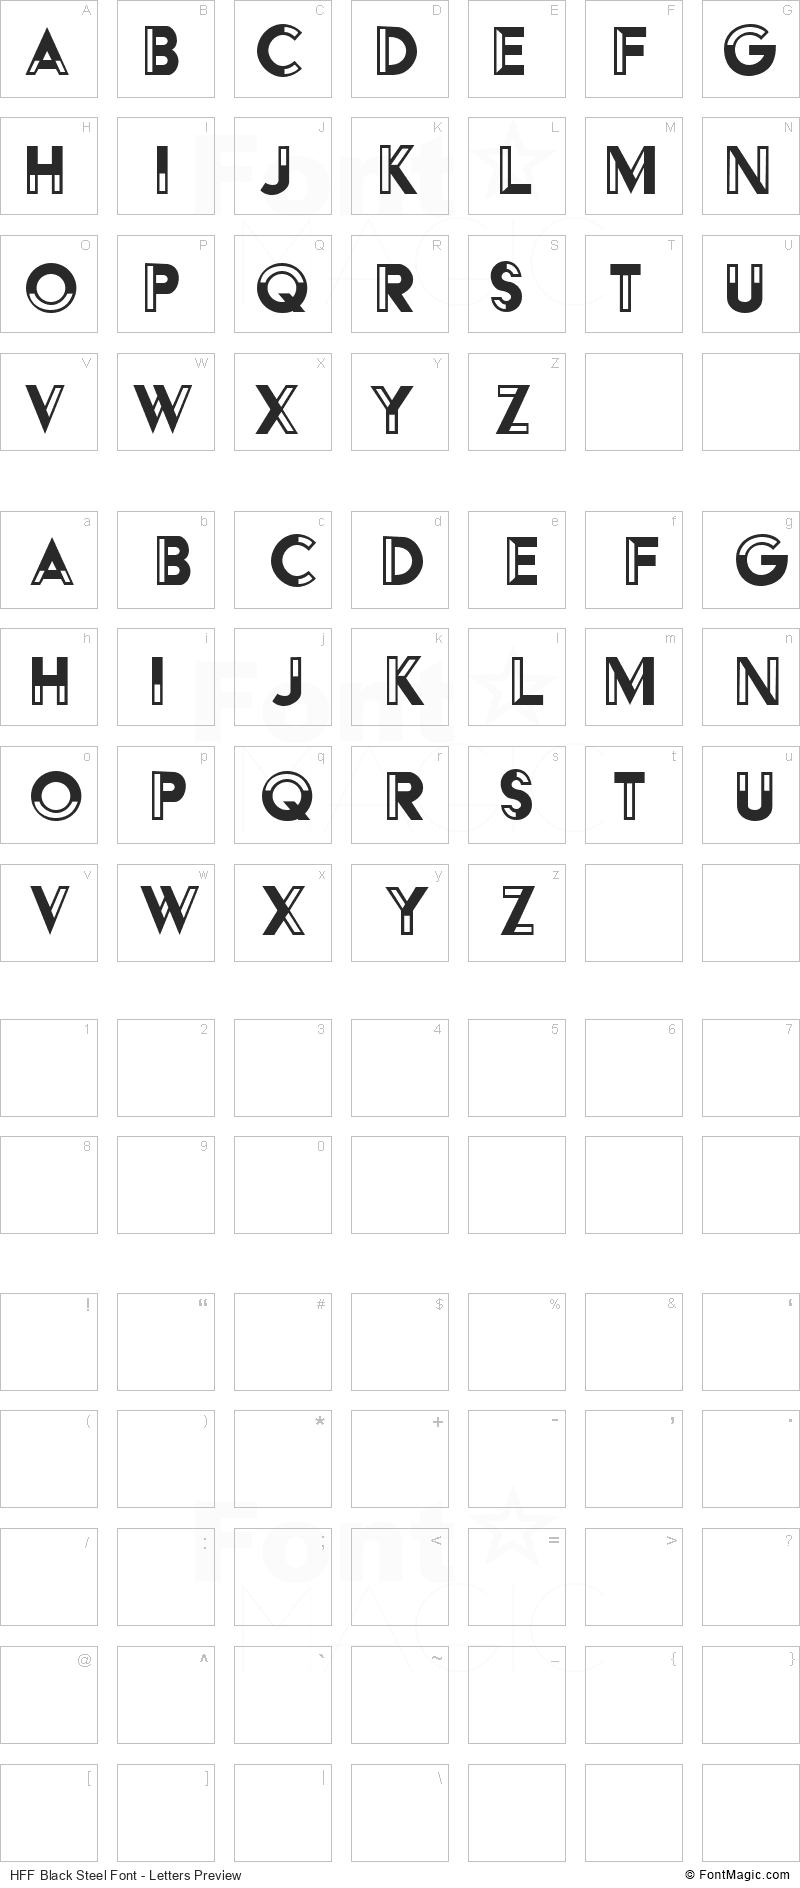 HFF Black Steel Font - All Latters Preview Chart